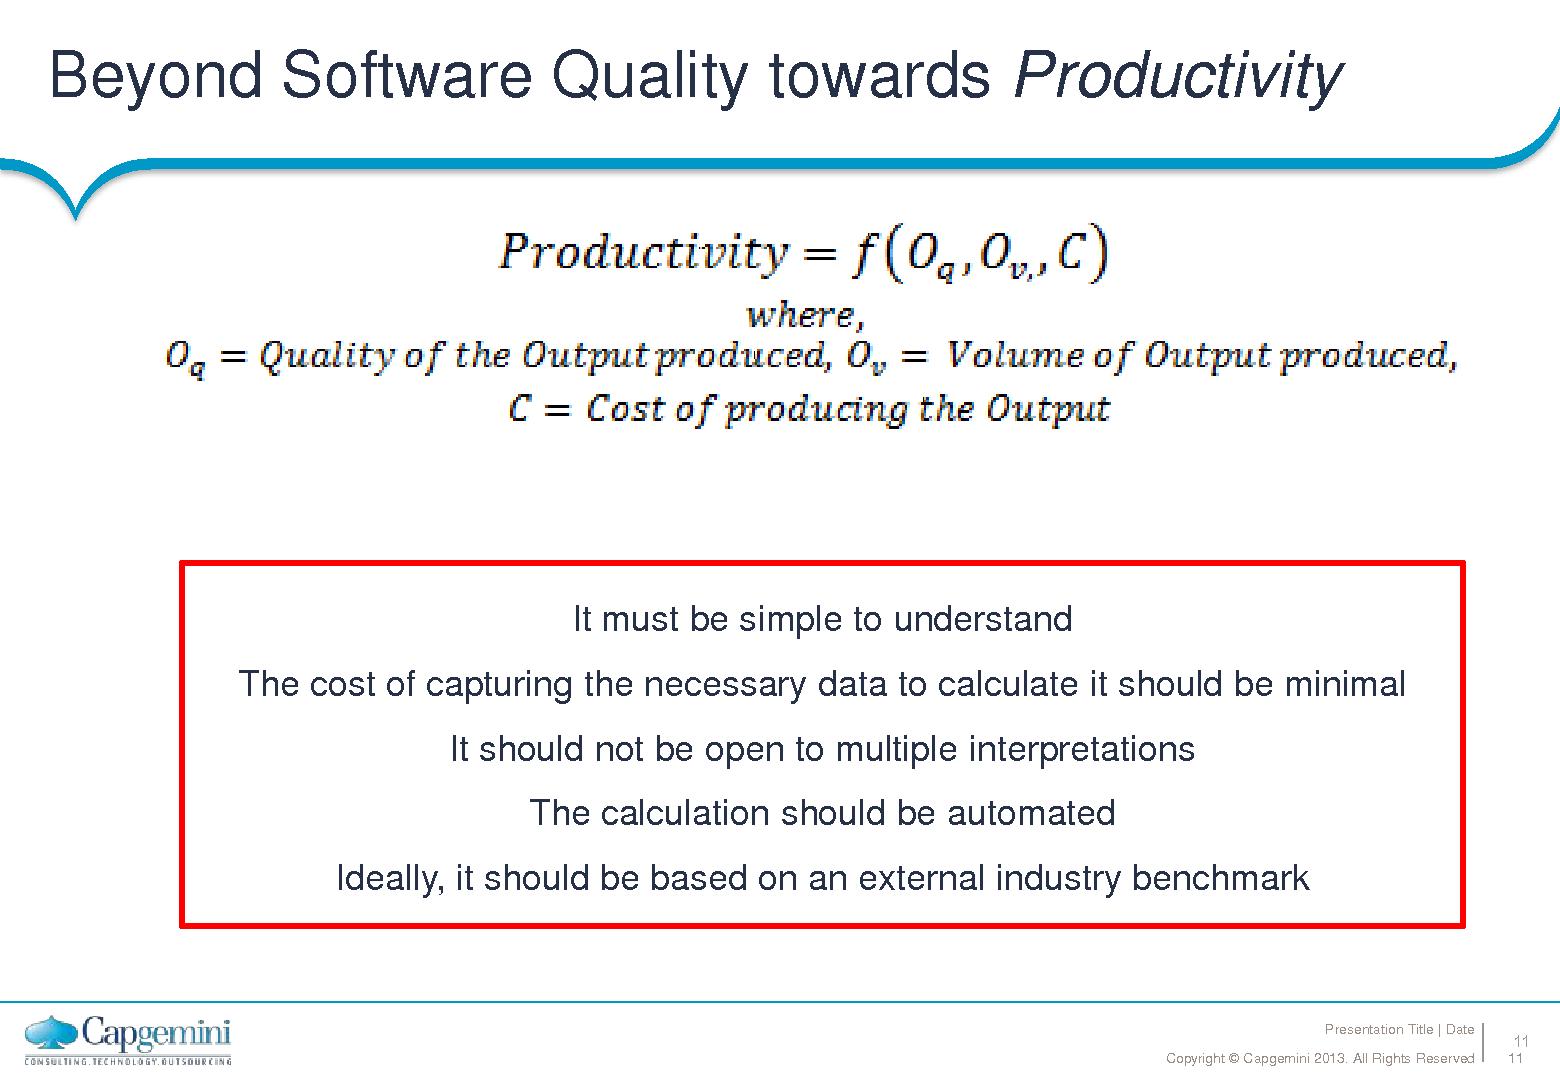 Файл:The Art of Assuring Software Quality in a Distributed World (Mark Standeaven, SECR-2014).pdf